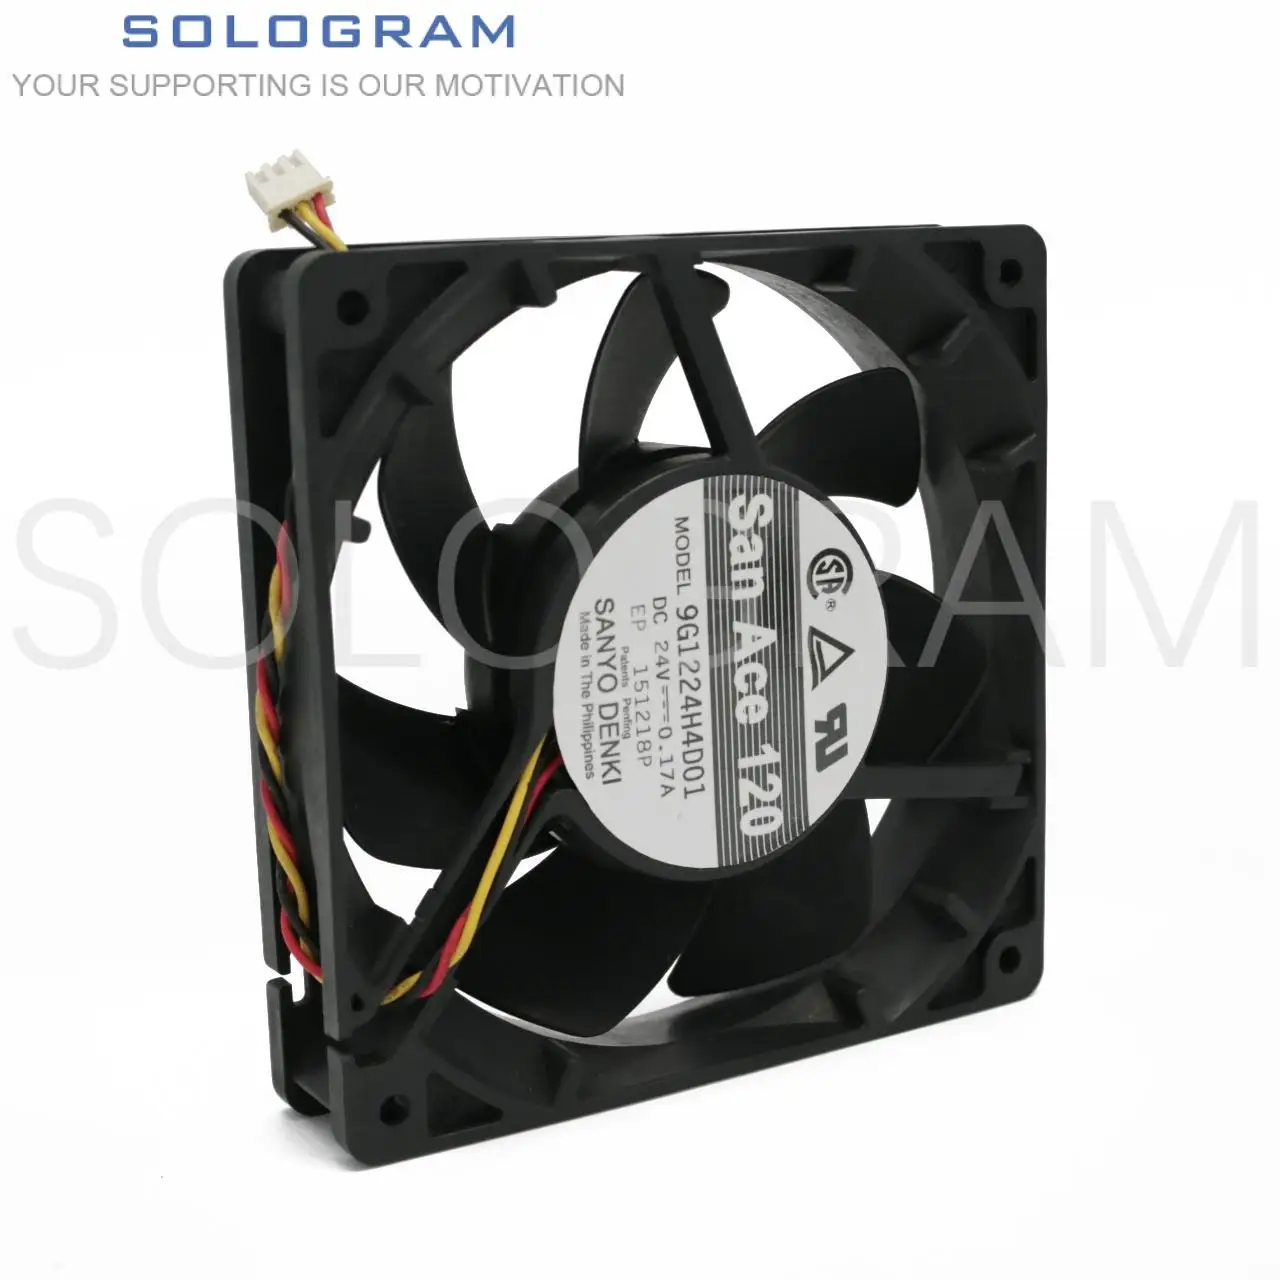 

1Pc Brand New Original San Ace 120 For 9G1224H4D01 DC 24V 0.17A 9G1224G4D01 12025 120*120*25MM Inverter Axial Fan 3Pin Cable